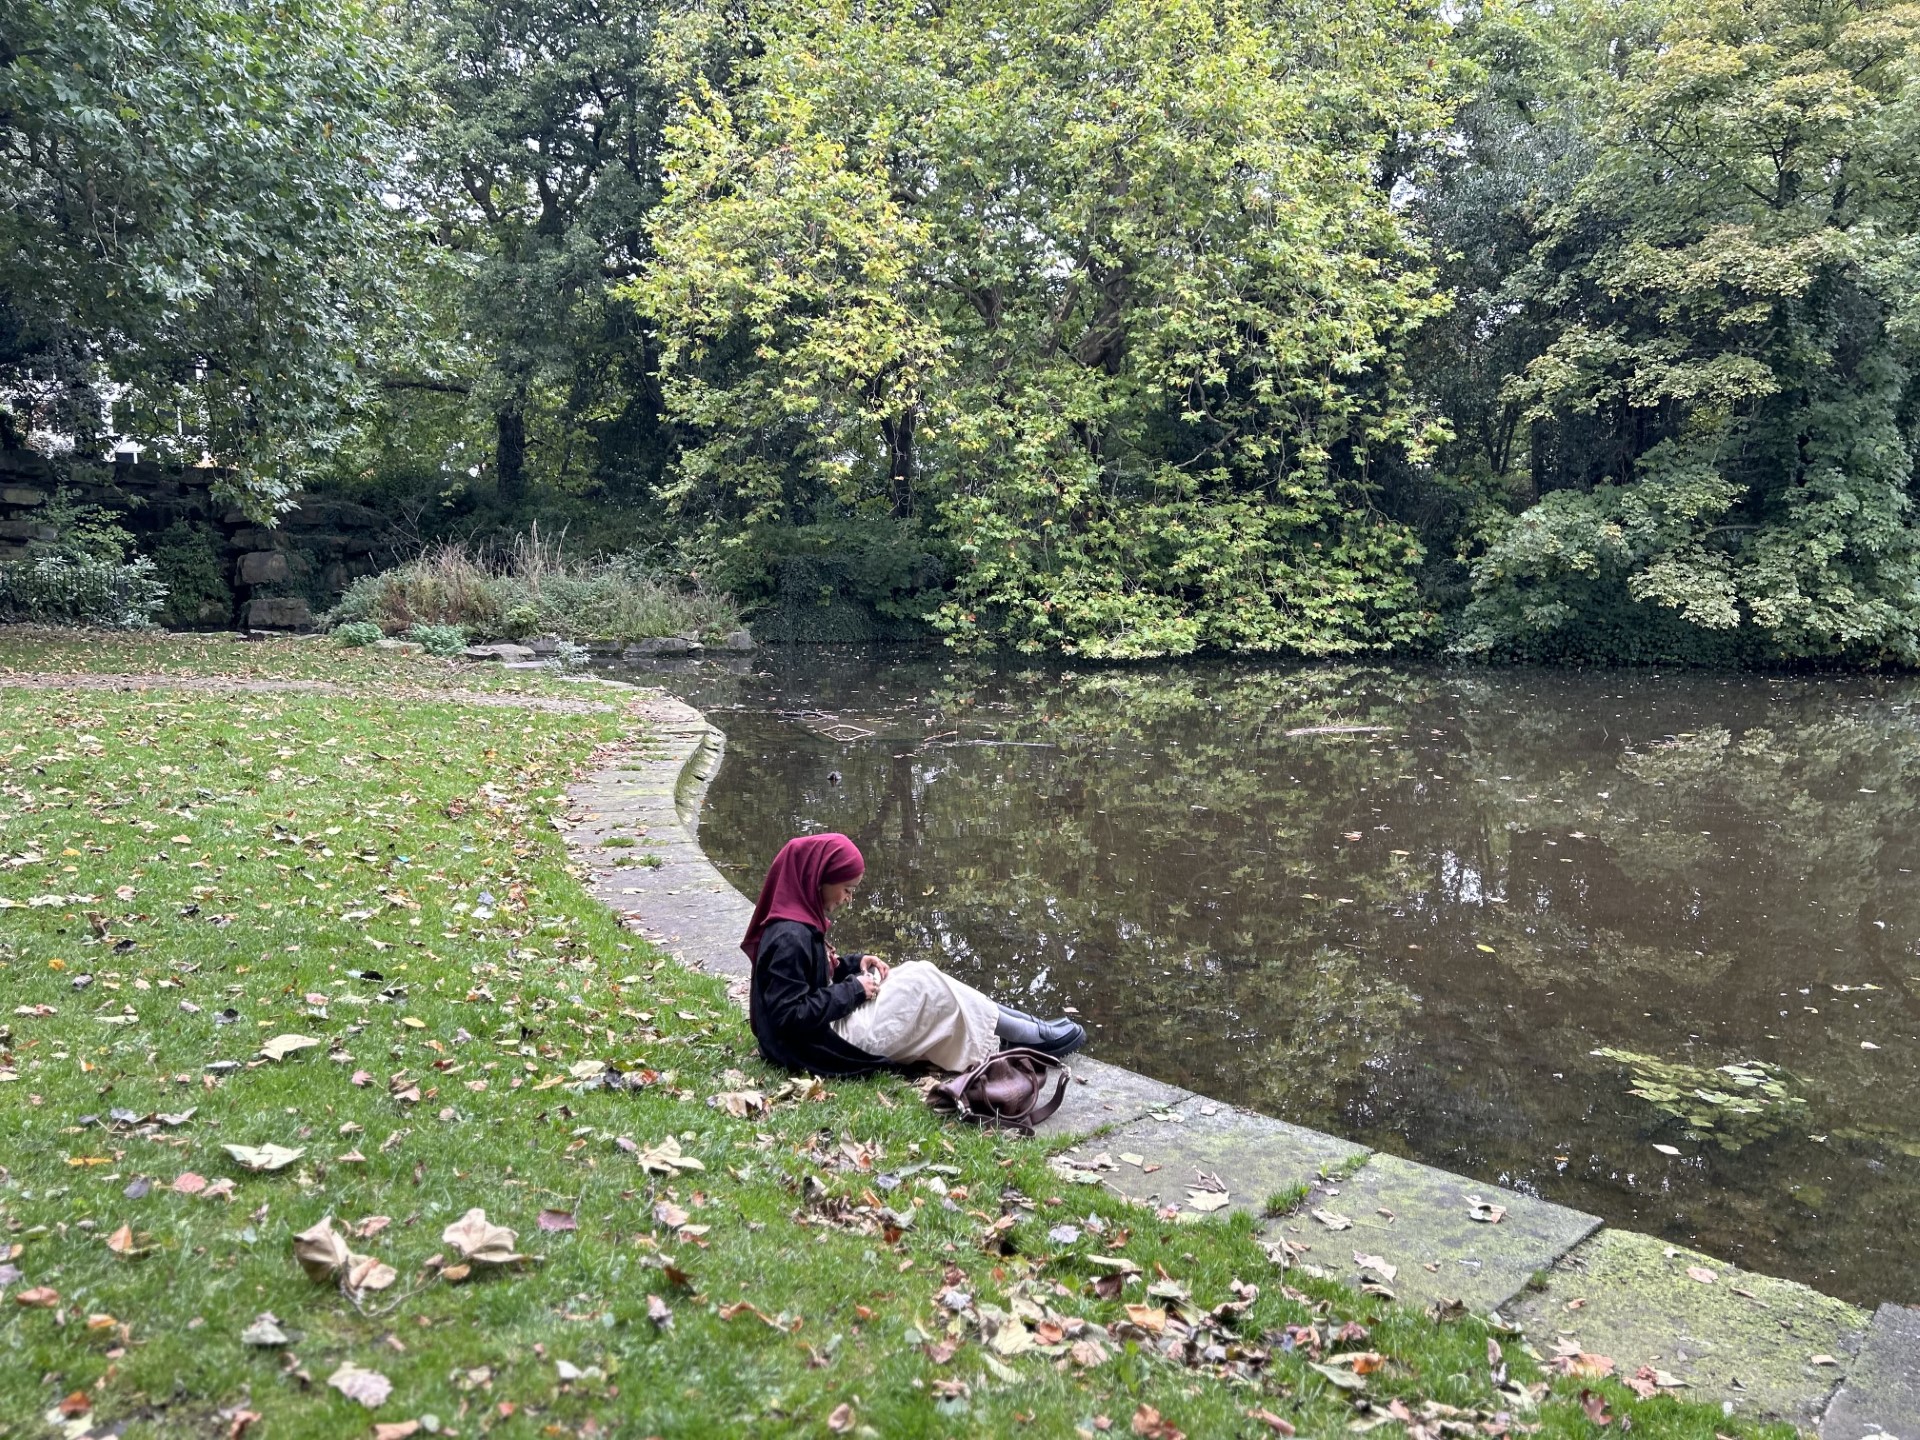 Sabirah enjoying some time alone in St. Stephen's Green.